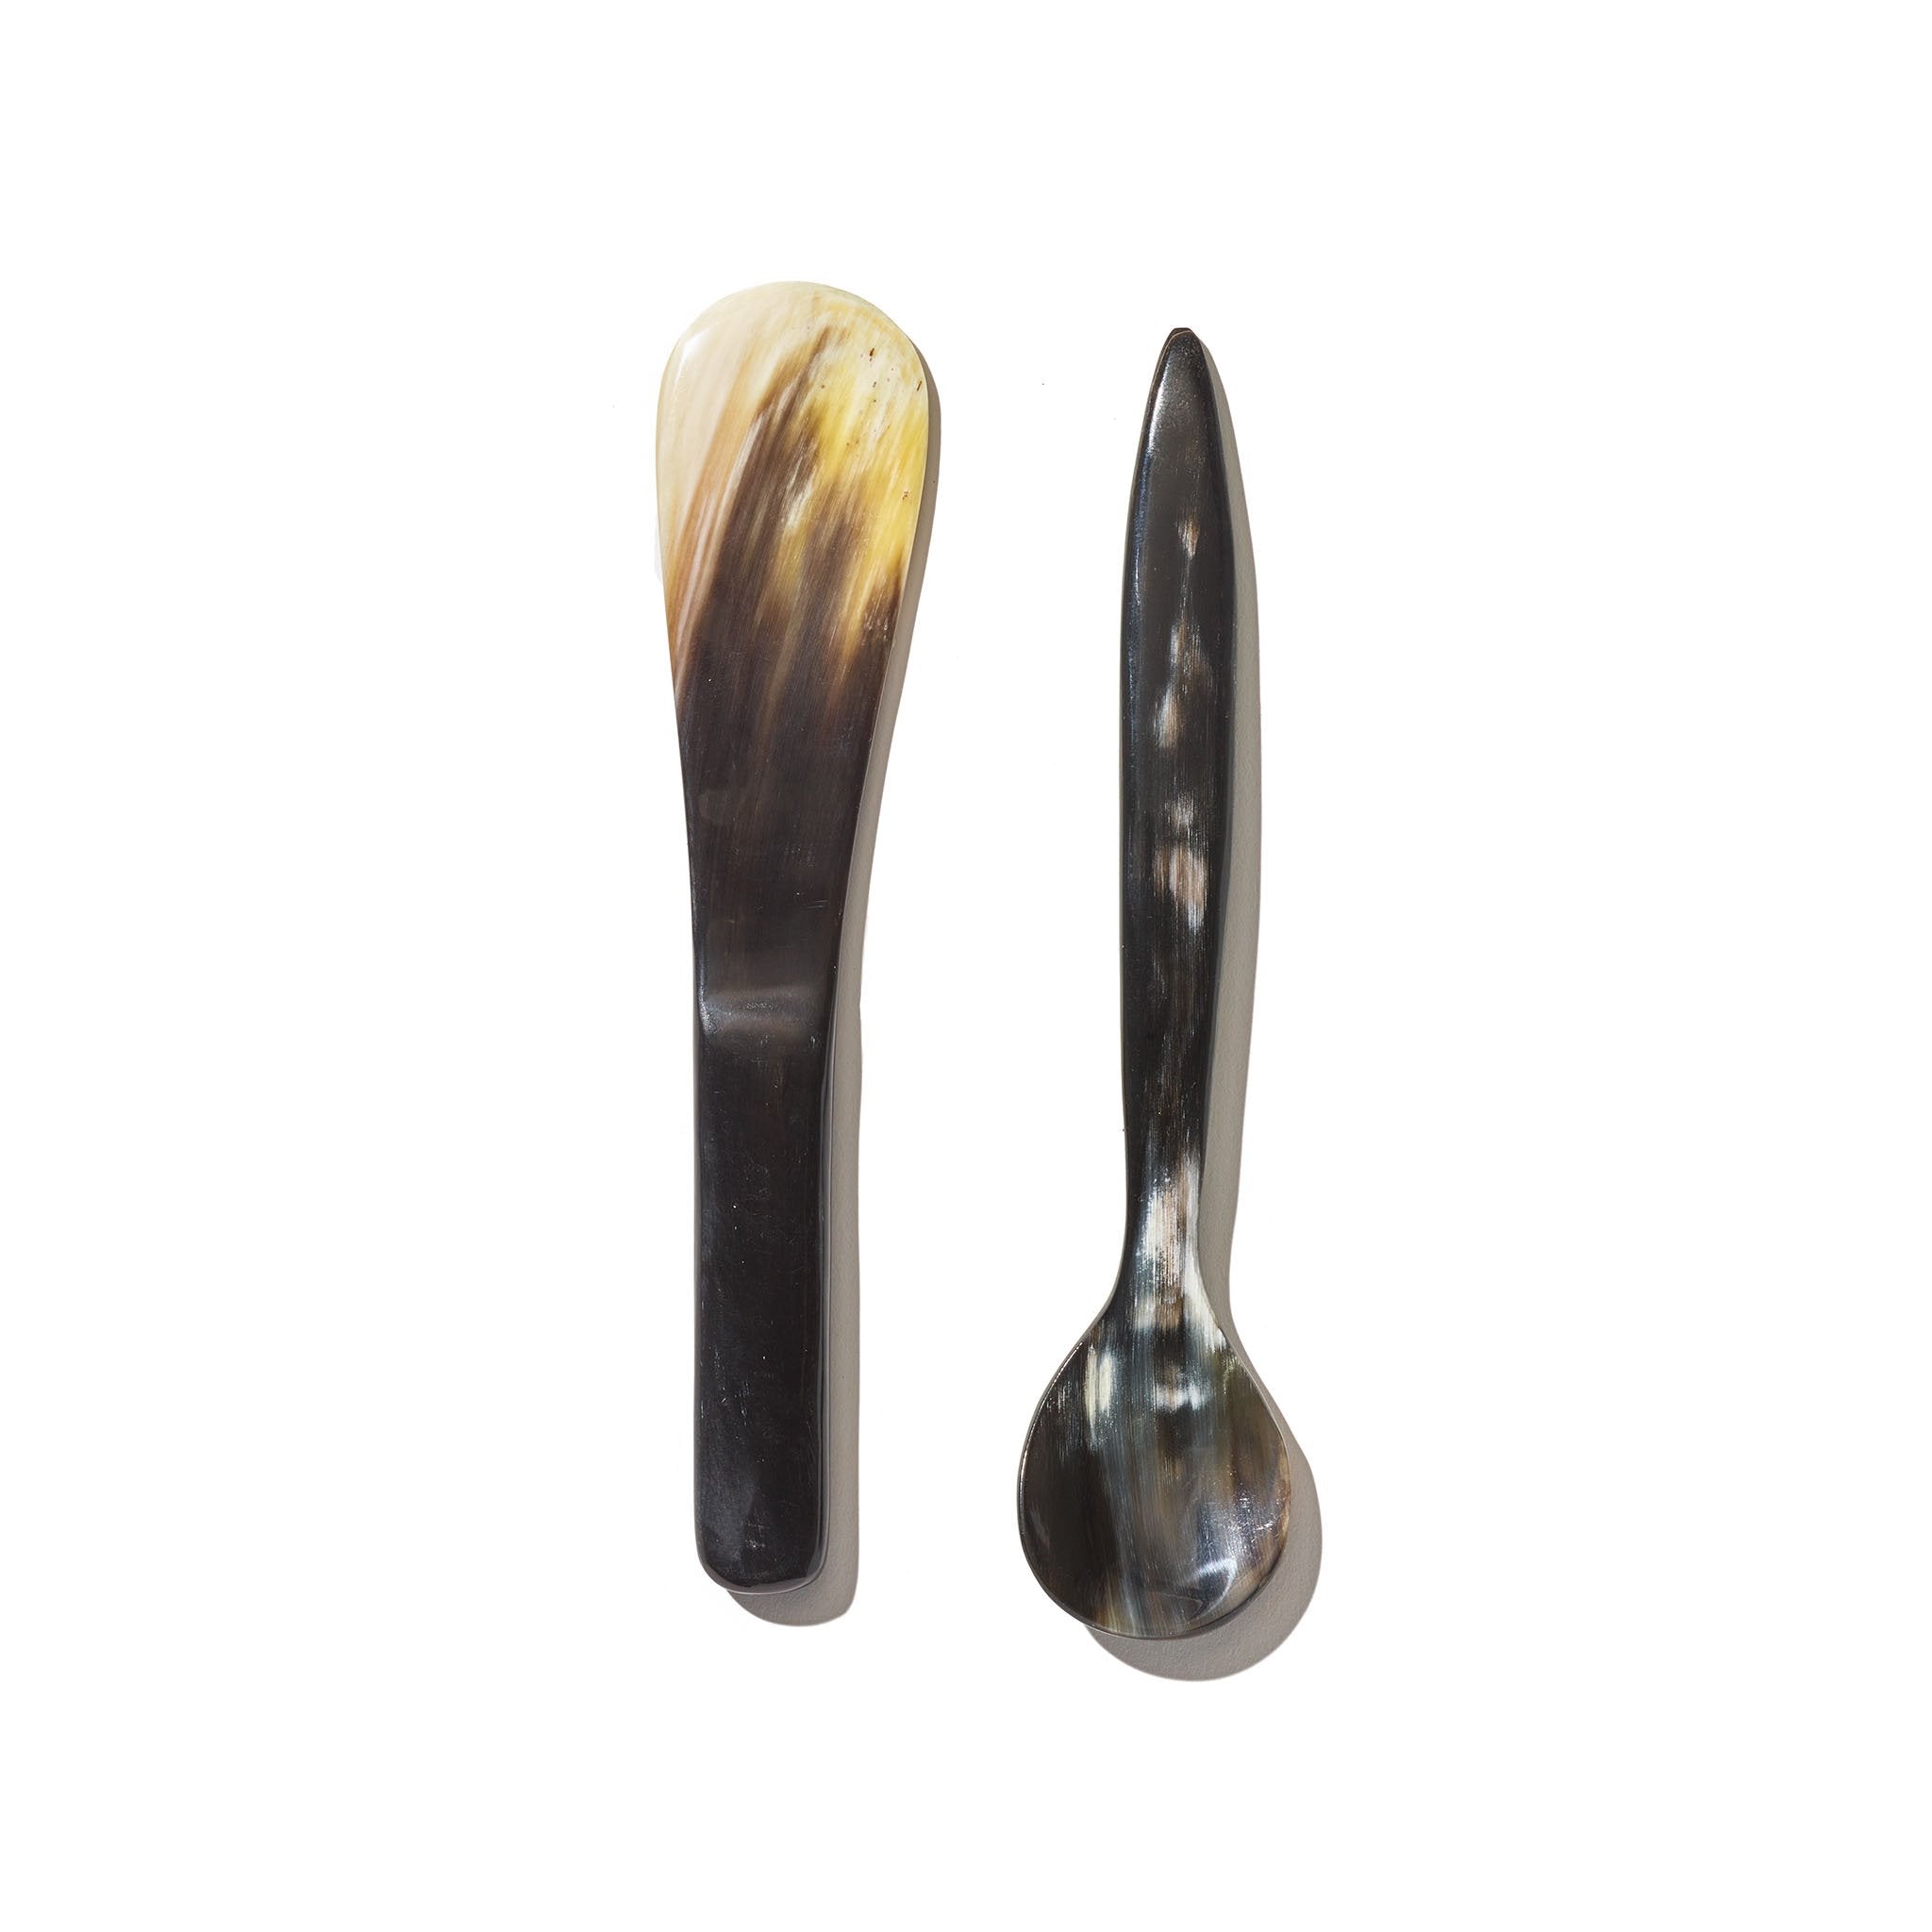 Make breakfast and brunch even more fun with this utensil set handcrafted from upcycled horn.